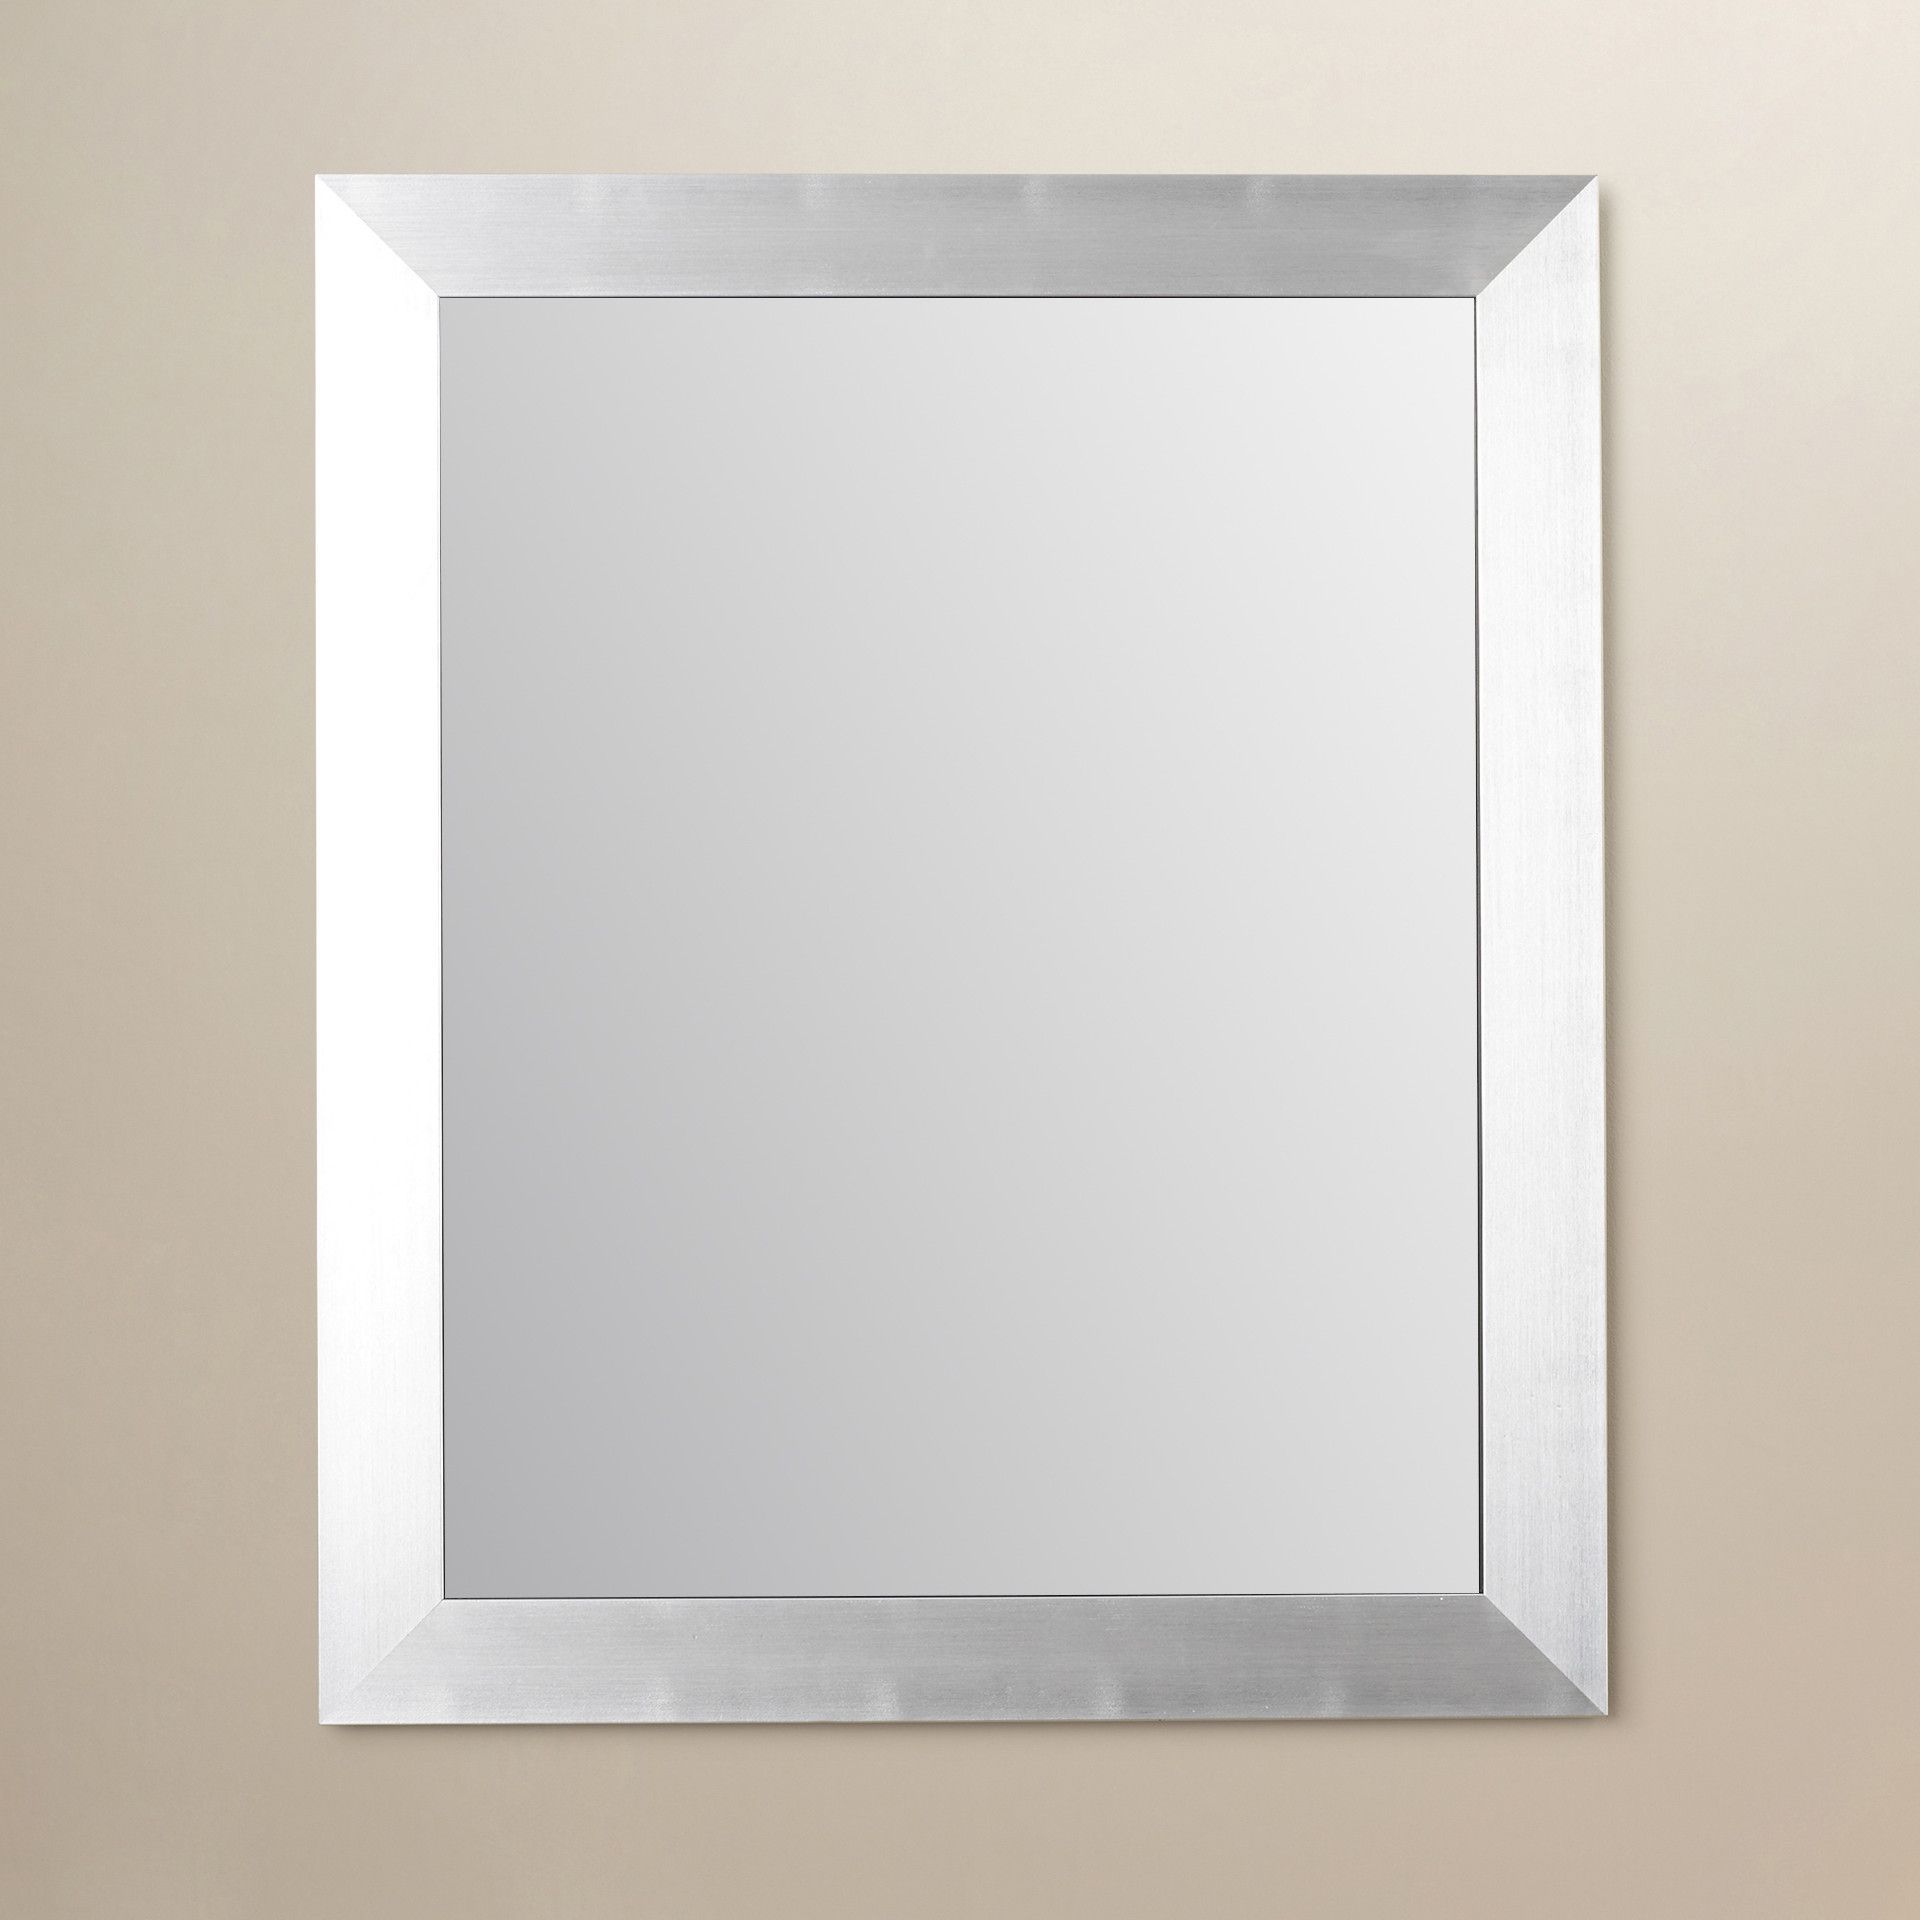 Beveled Bathroom / Vanity Wall Mirror | Mirror Wall Bedroom, Hanging Pertaining To Northend Wall Mirrors (View 9 of 15)